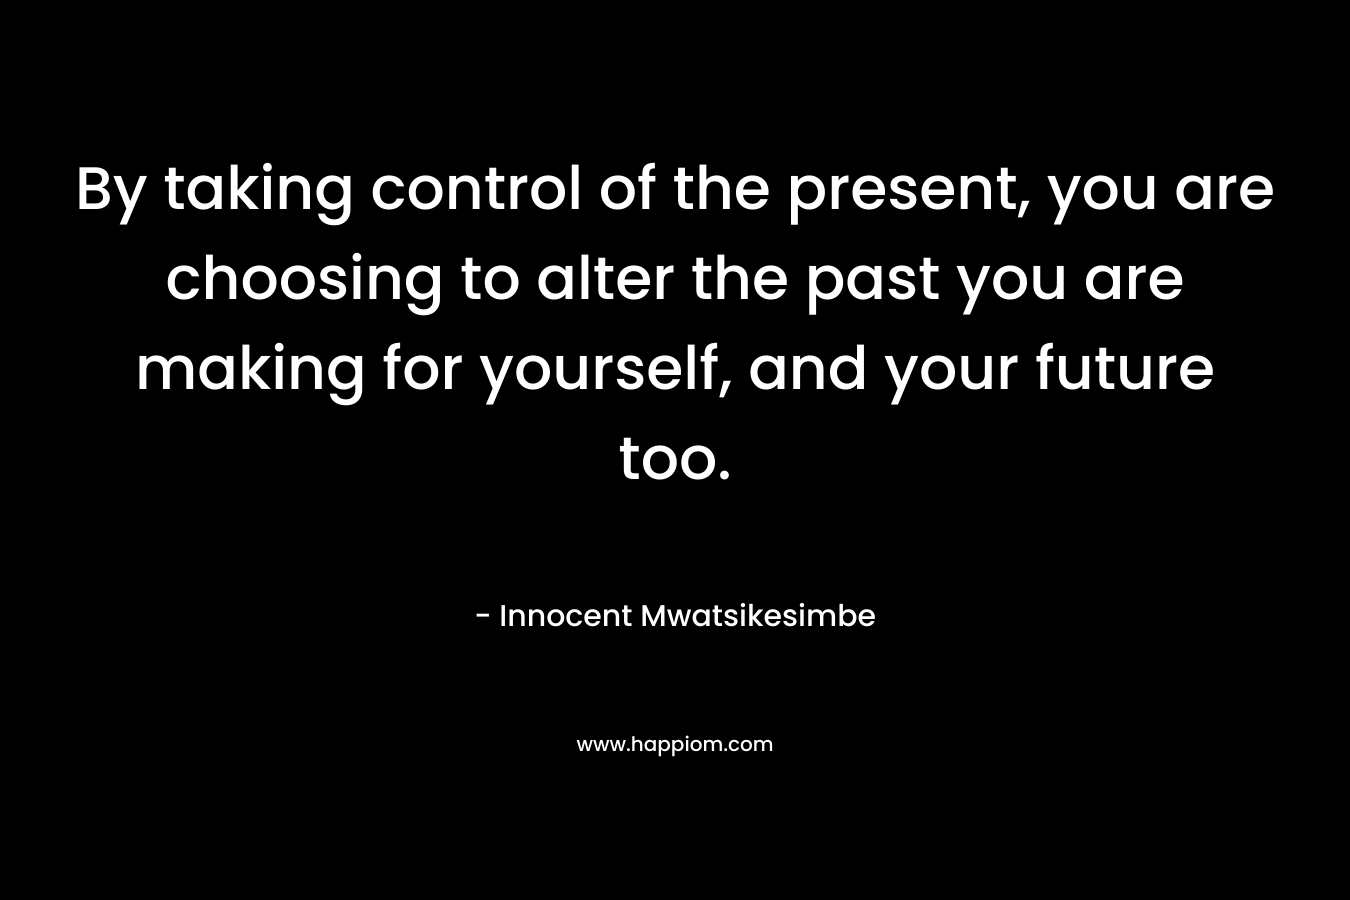 By taking control of the present, you are choosing to alter the past you are making for yourself, and your future too.